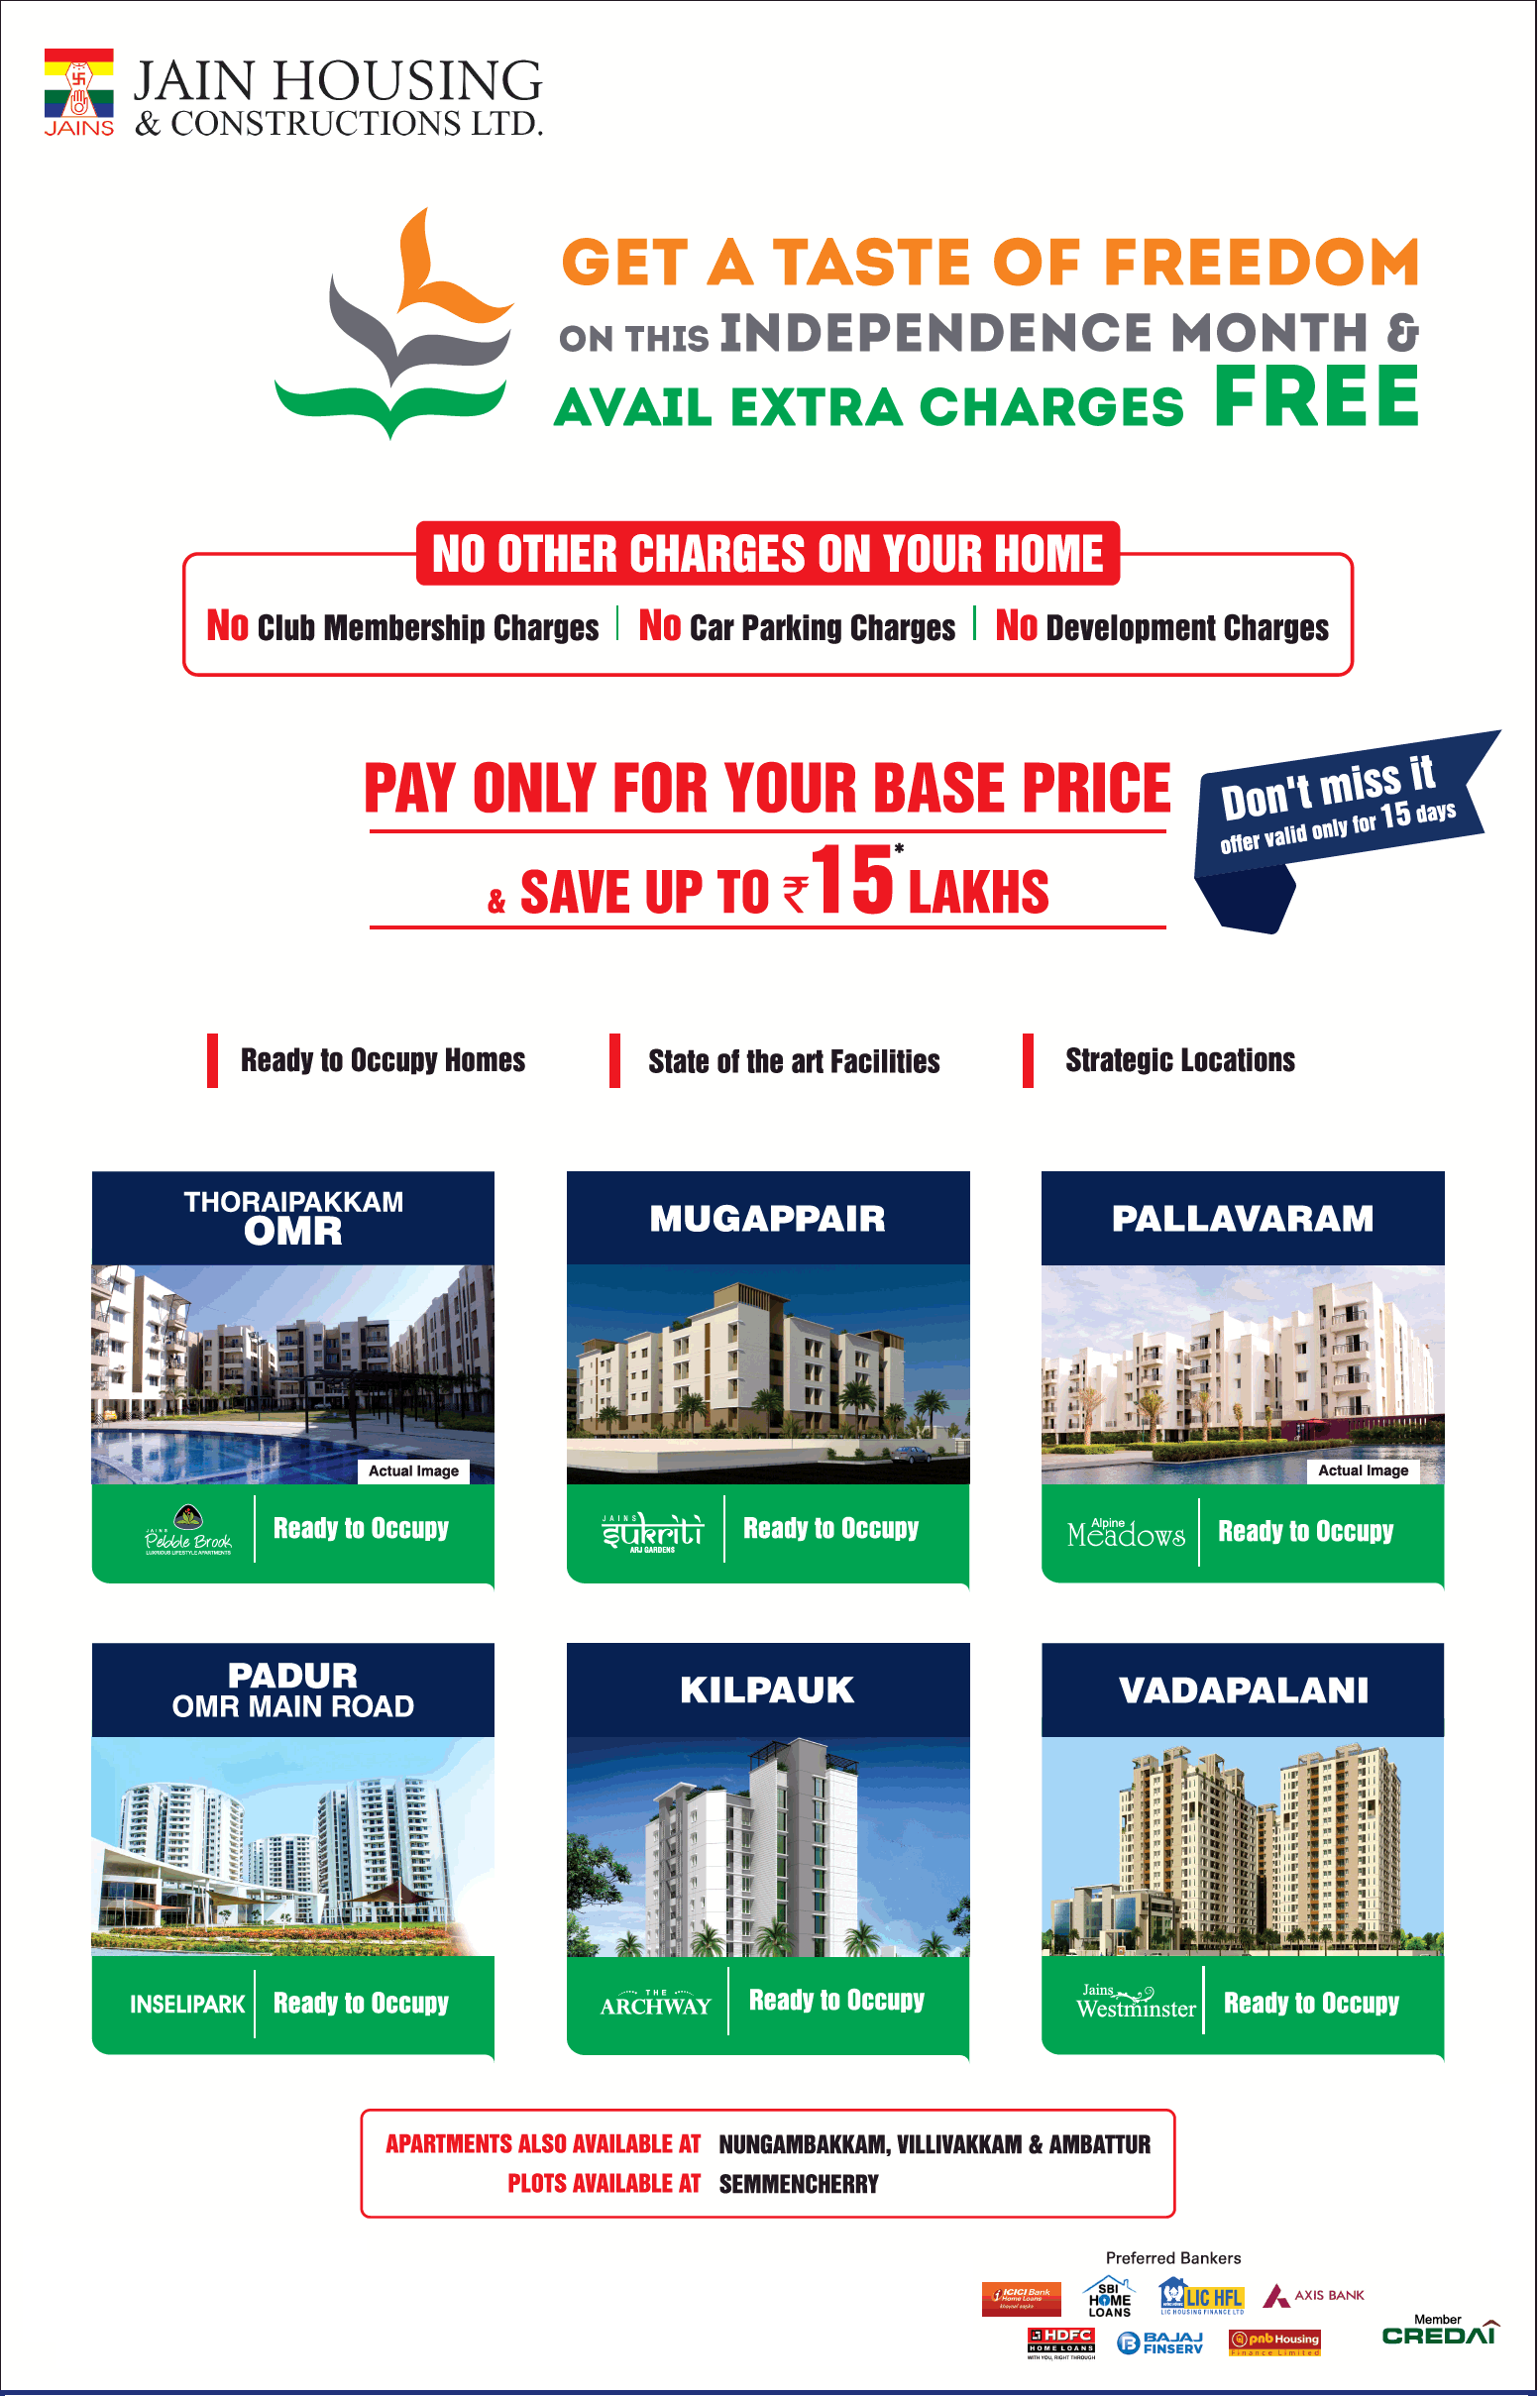 Get a taste of freedom on this independence month at Jain Housing, Chennai